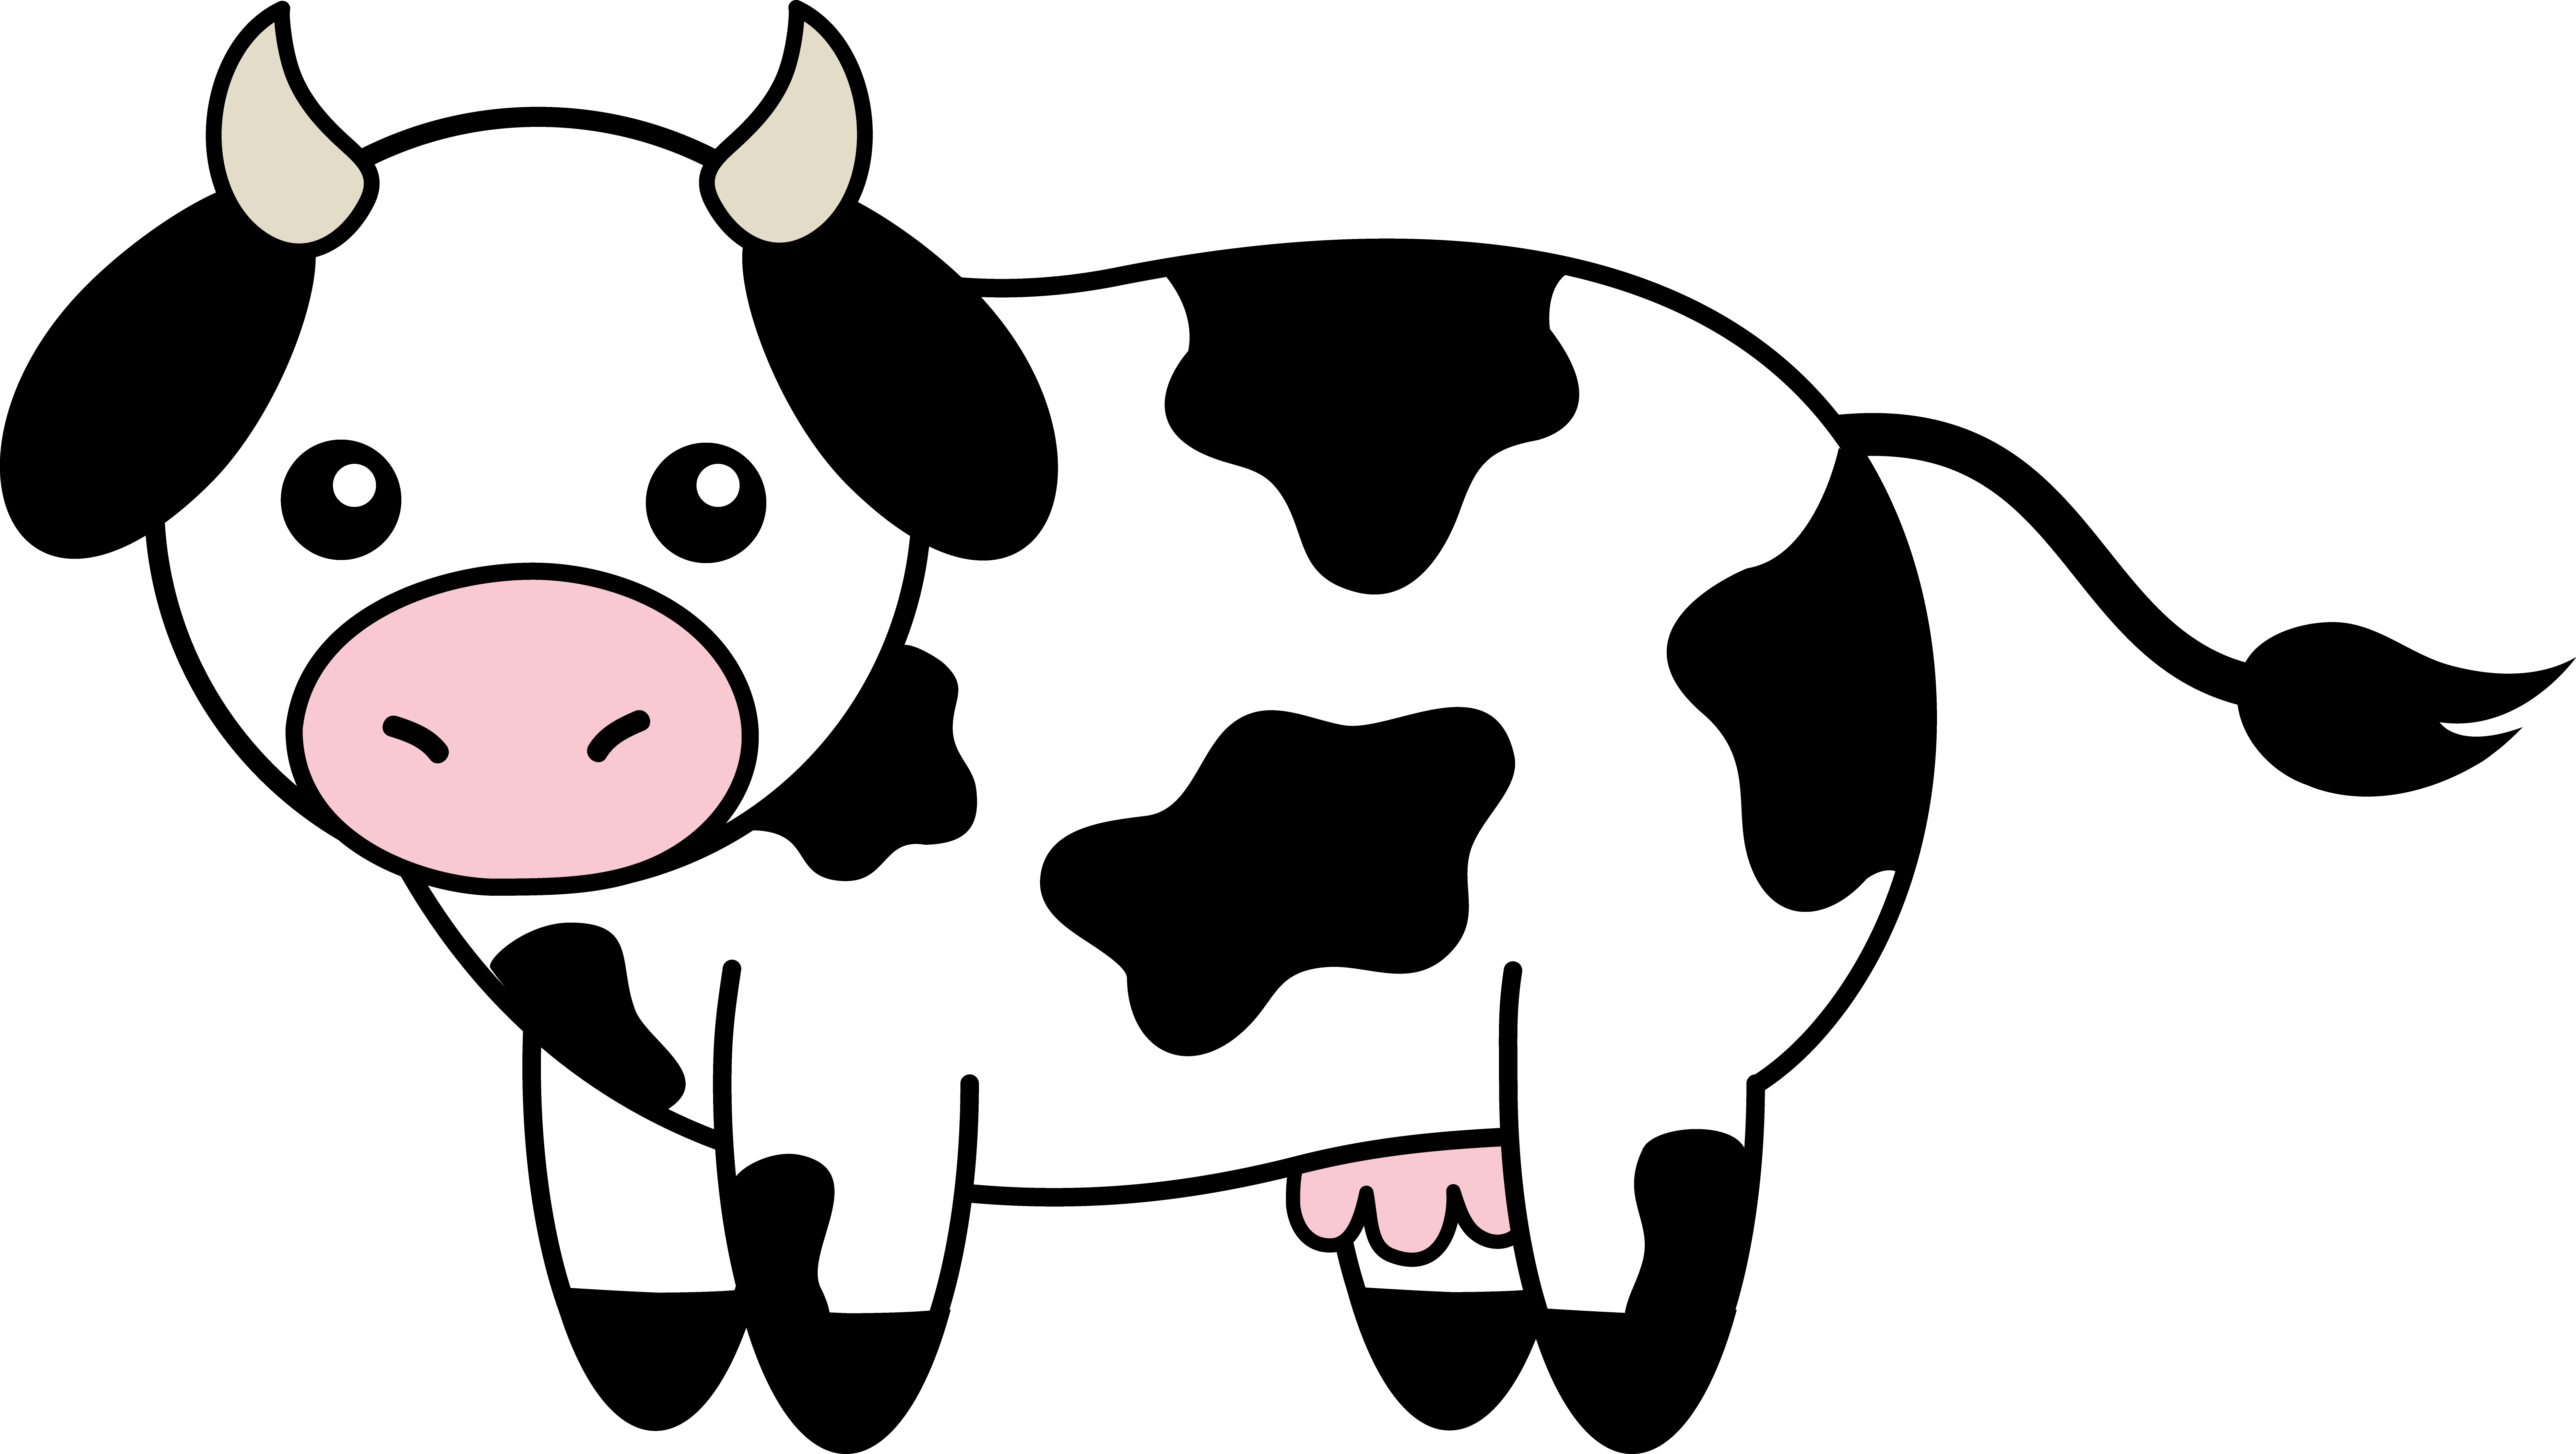 1000+ images about cows